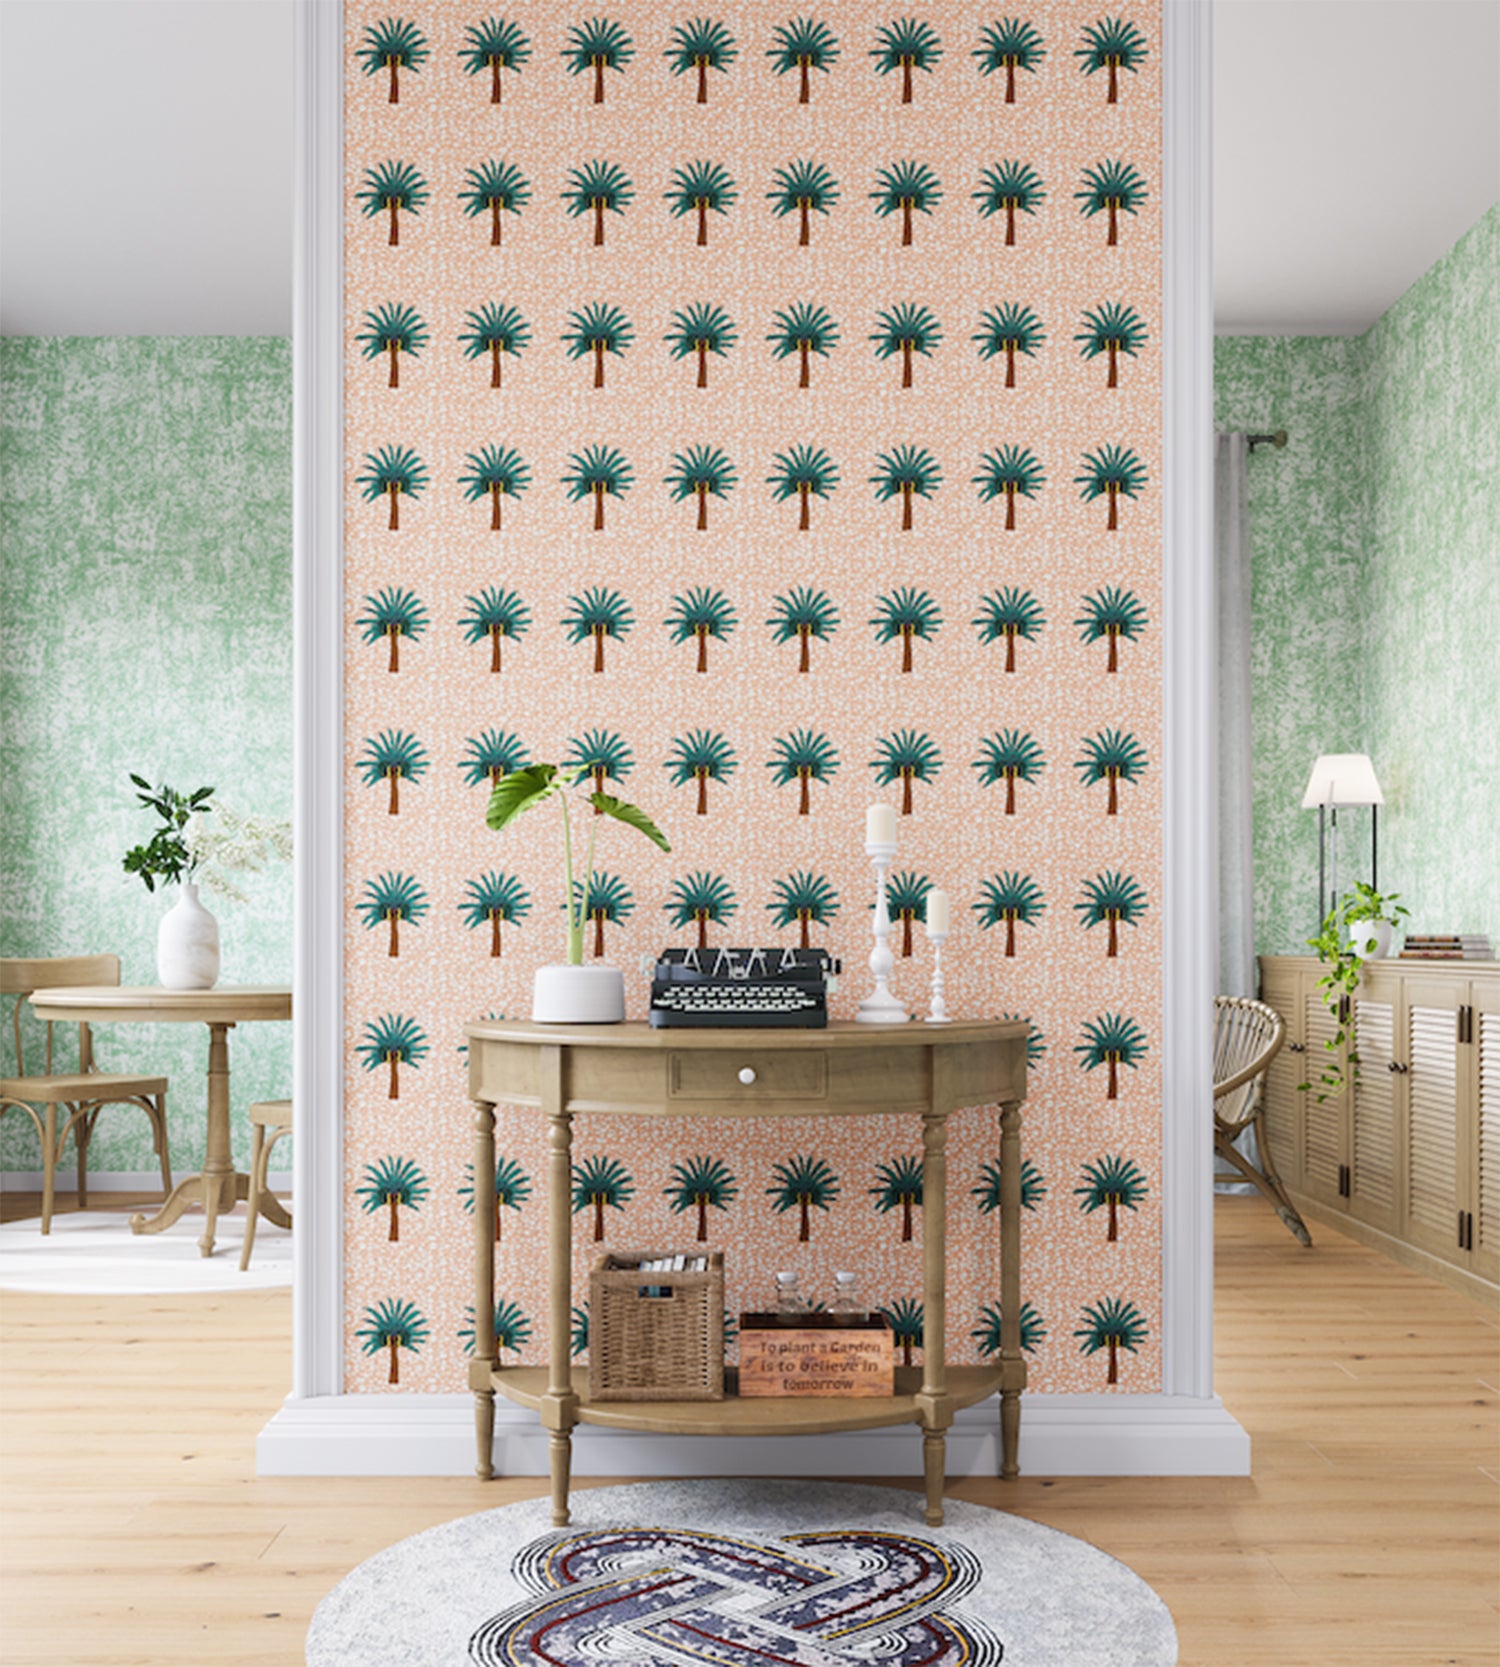 A maximalist living space with an accent wall papered in a repeating palm tree print in turquoise, brown, pink and white.